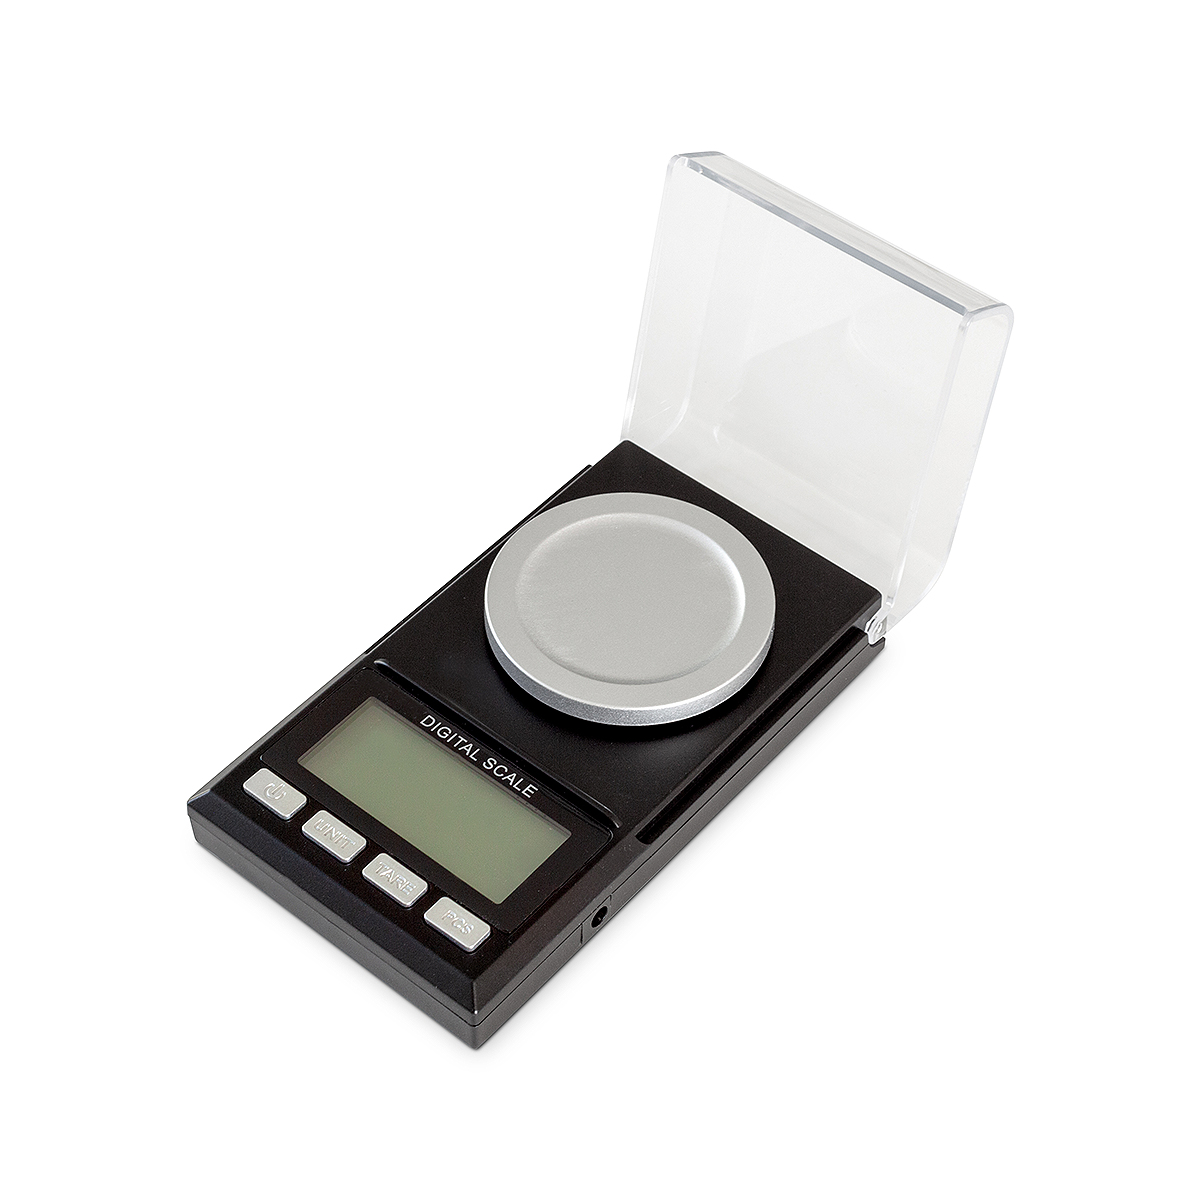 Precision digital scales: accurate to 0.001g (1mg)